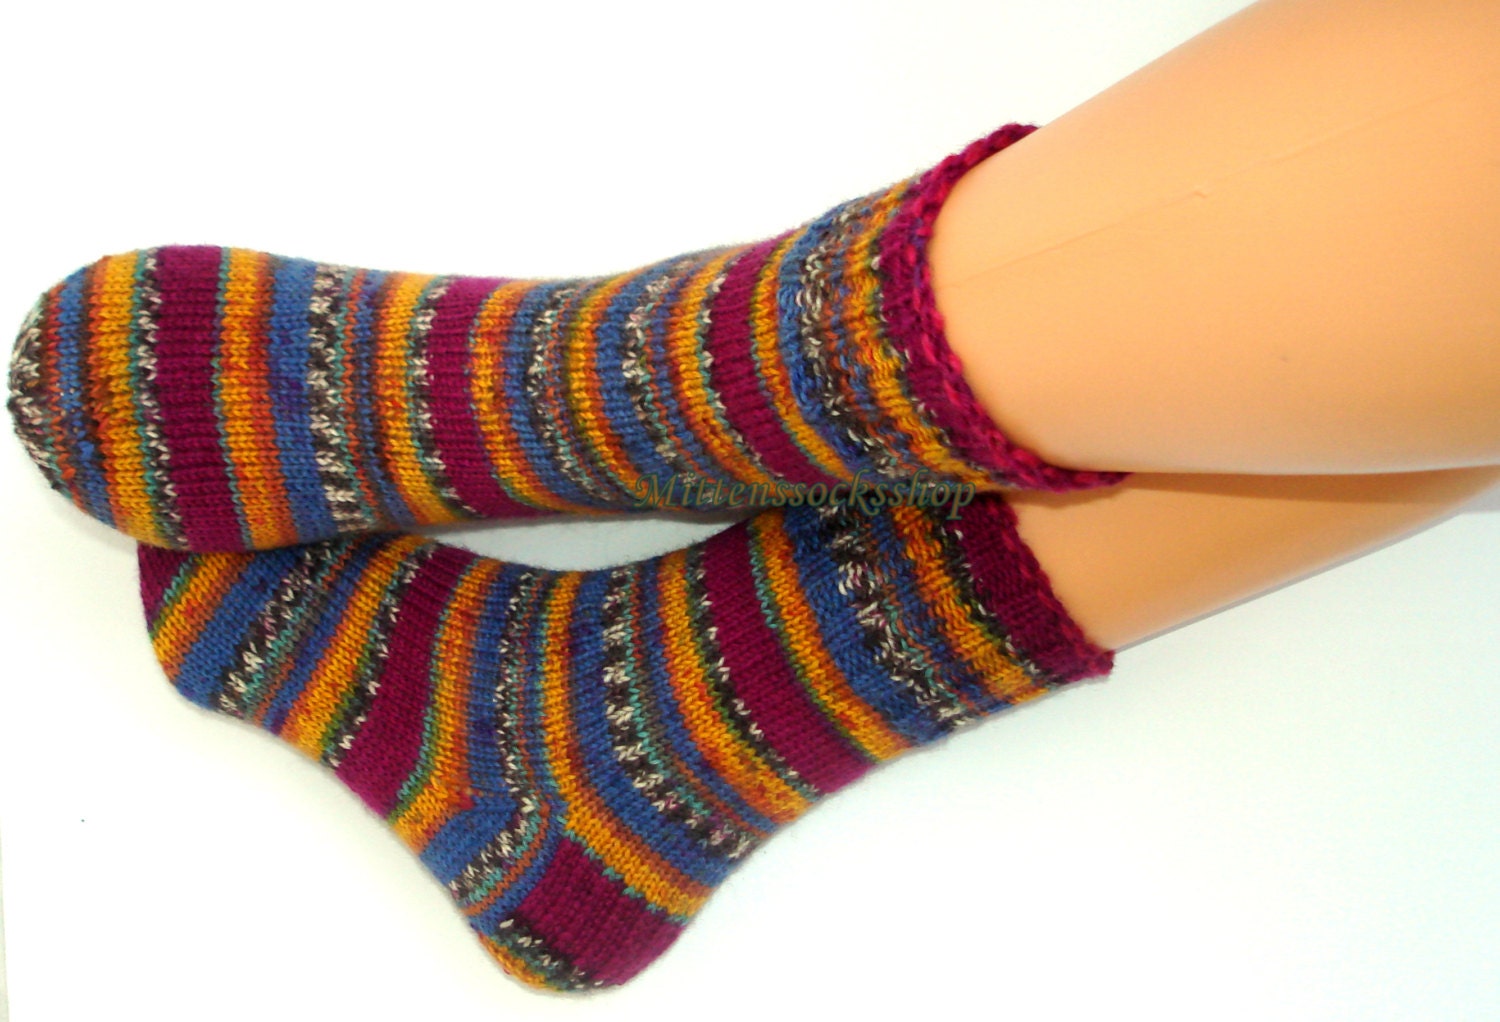 Hand Knitted Wool Socks Warm Elegant Colorful By Mittenssocksshop 